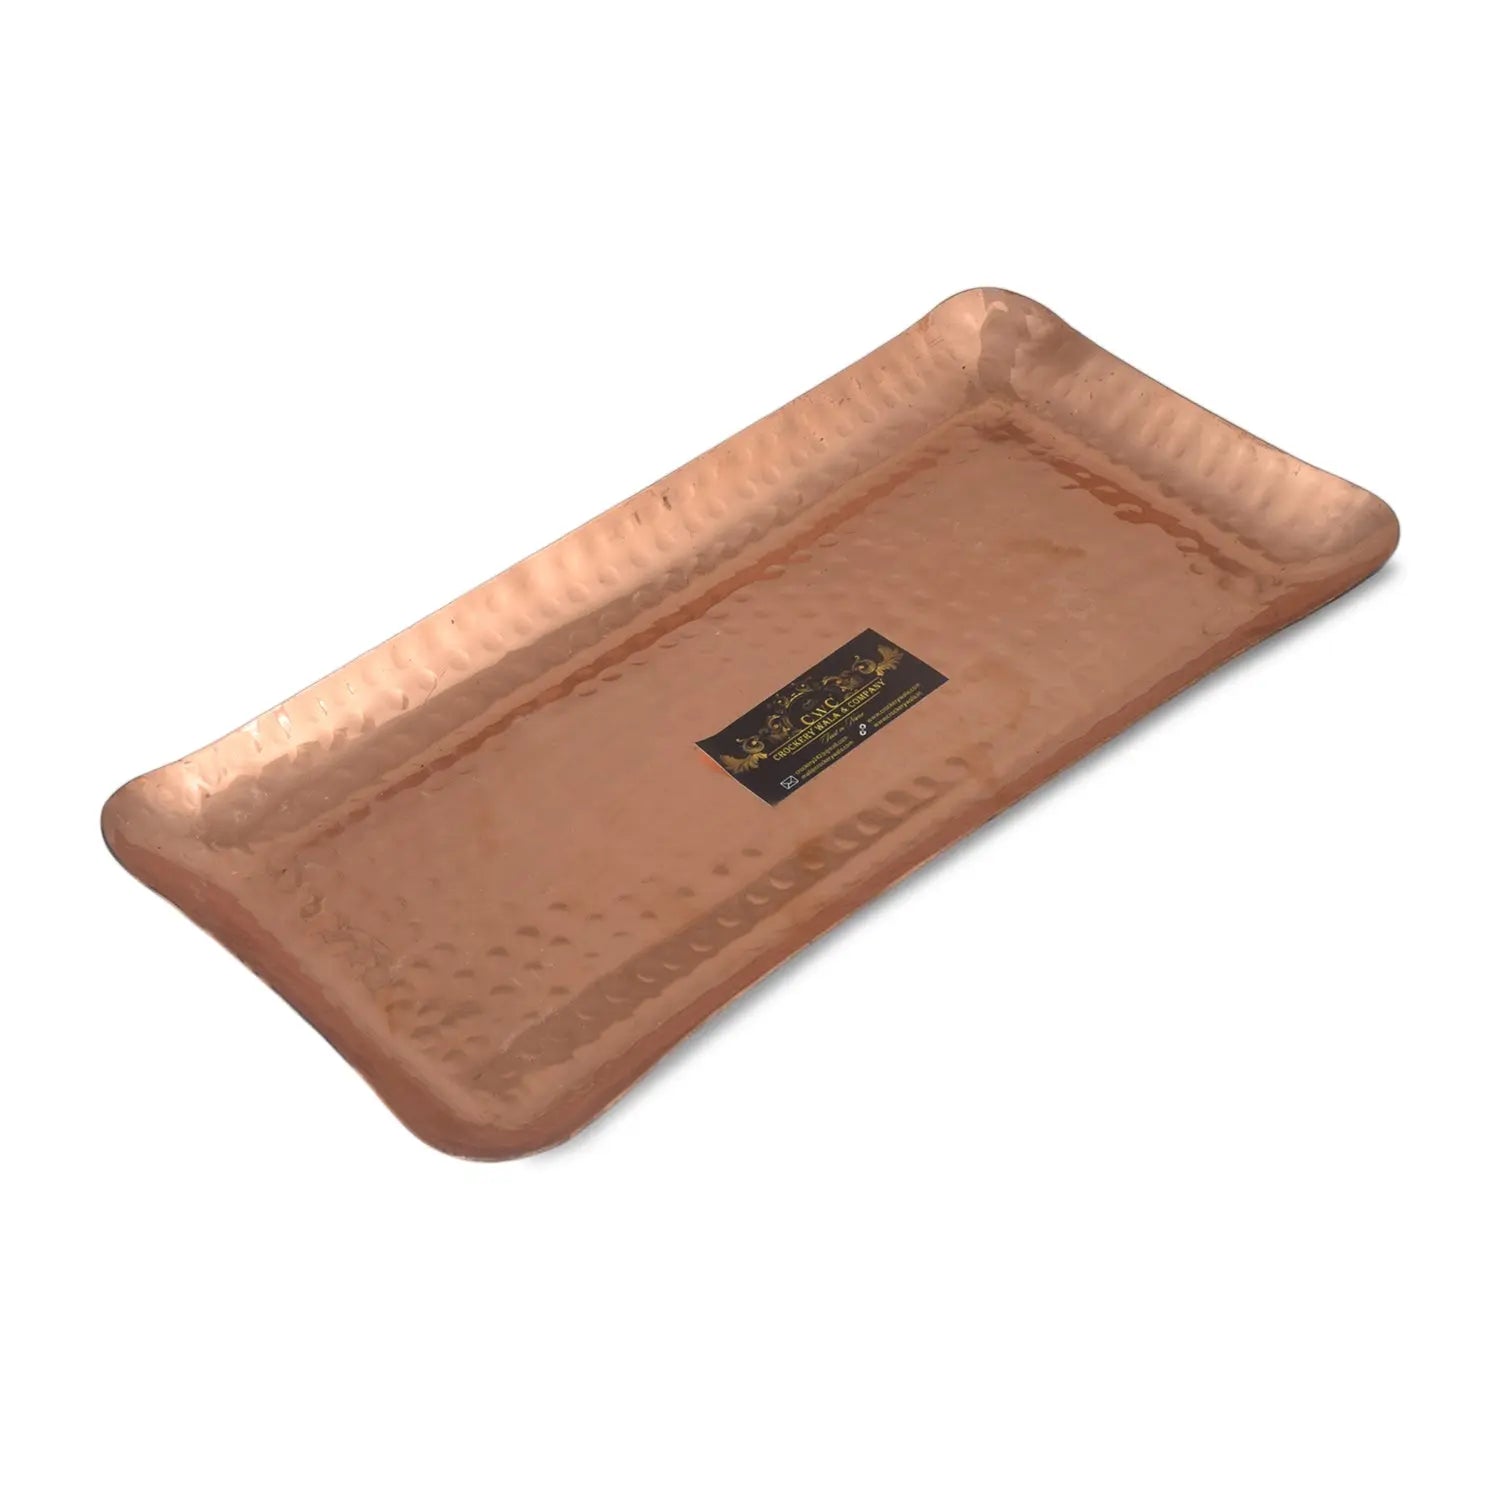 Pure Copper Tray, Platter, Plate Rectangle Hammered - CROCKERY WALA AND COMPANY 